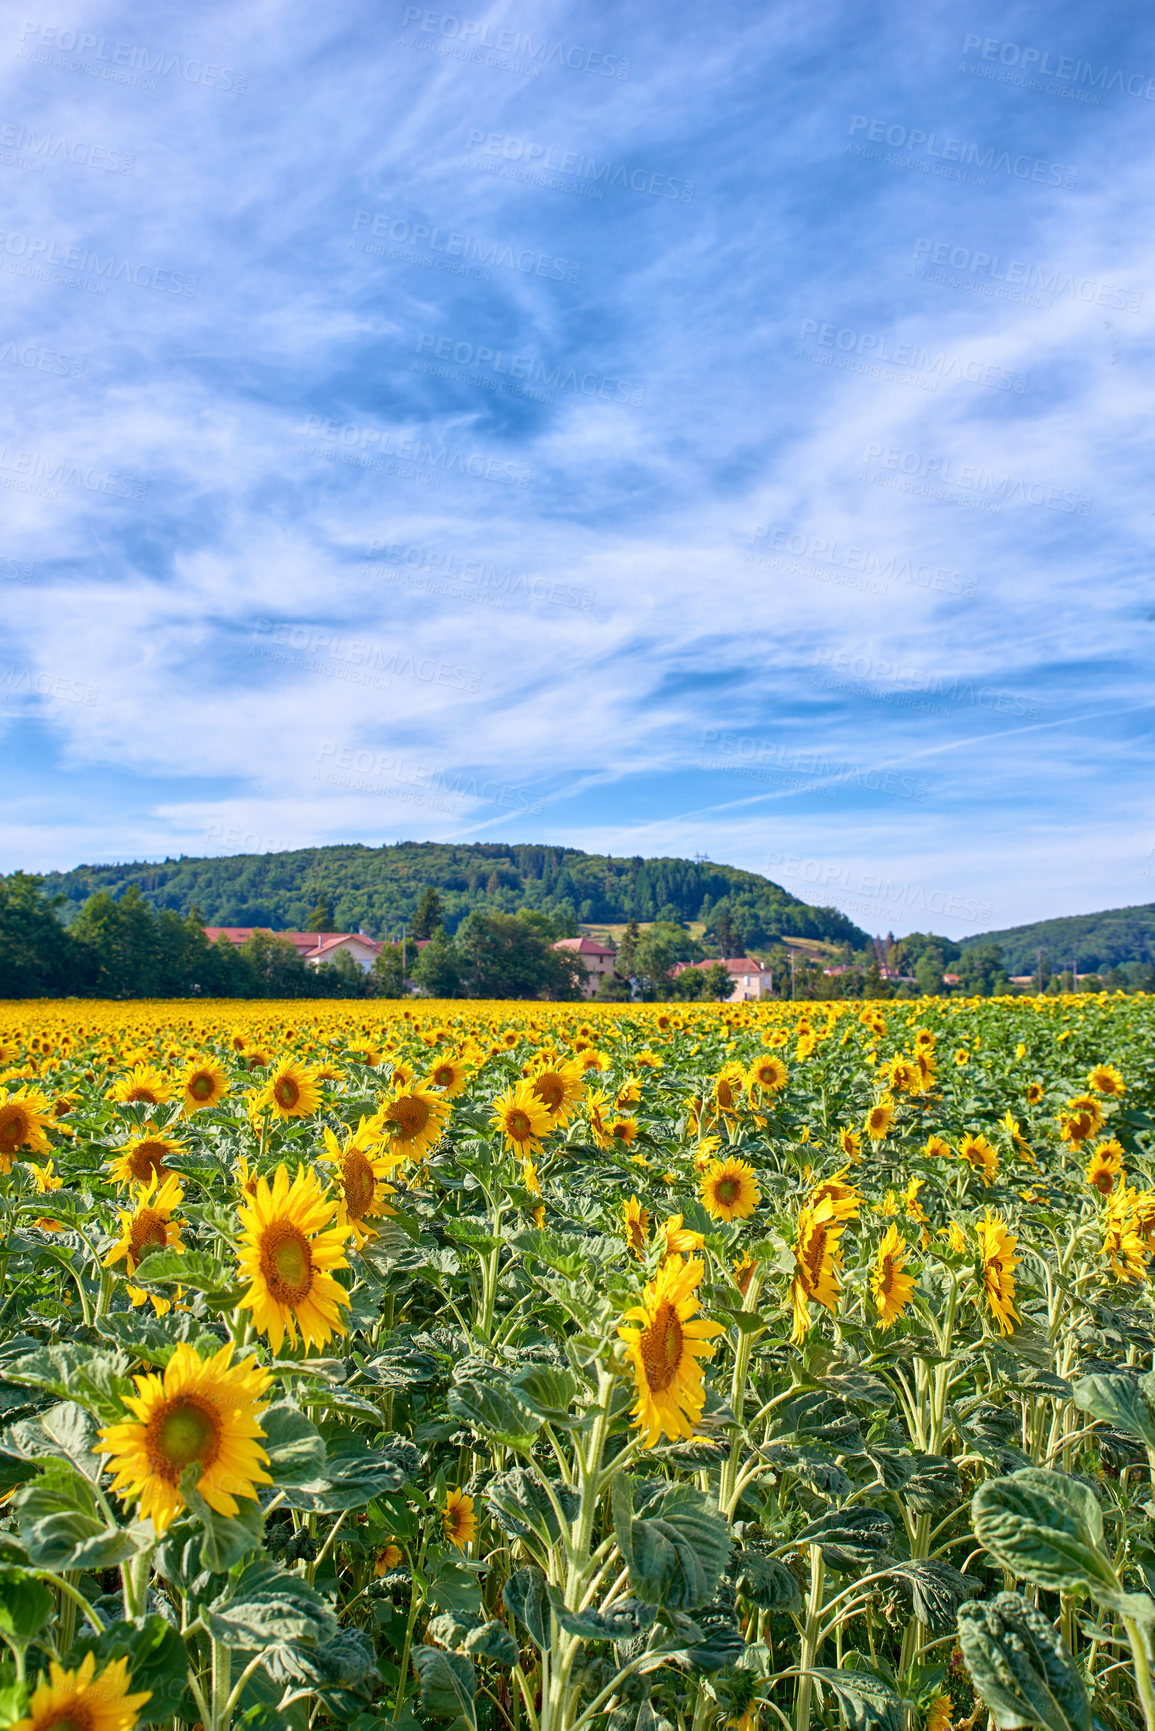 Buy stock photo Field of bright yellow sunflowers on a cloudy blue sky background. Beautiful agriculture oilseed crop flower landscape by a countryside. Seasonal sunflower plants on cultivated farm land with houses